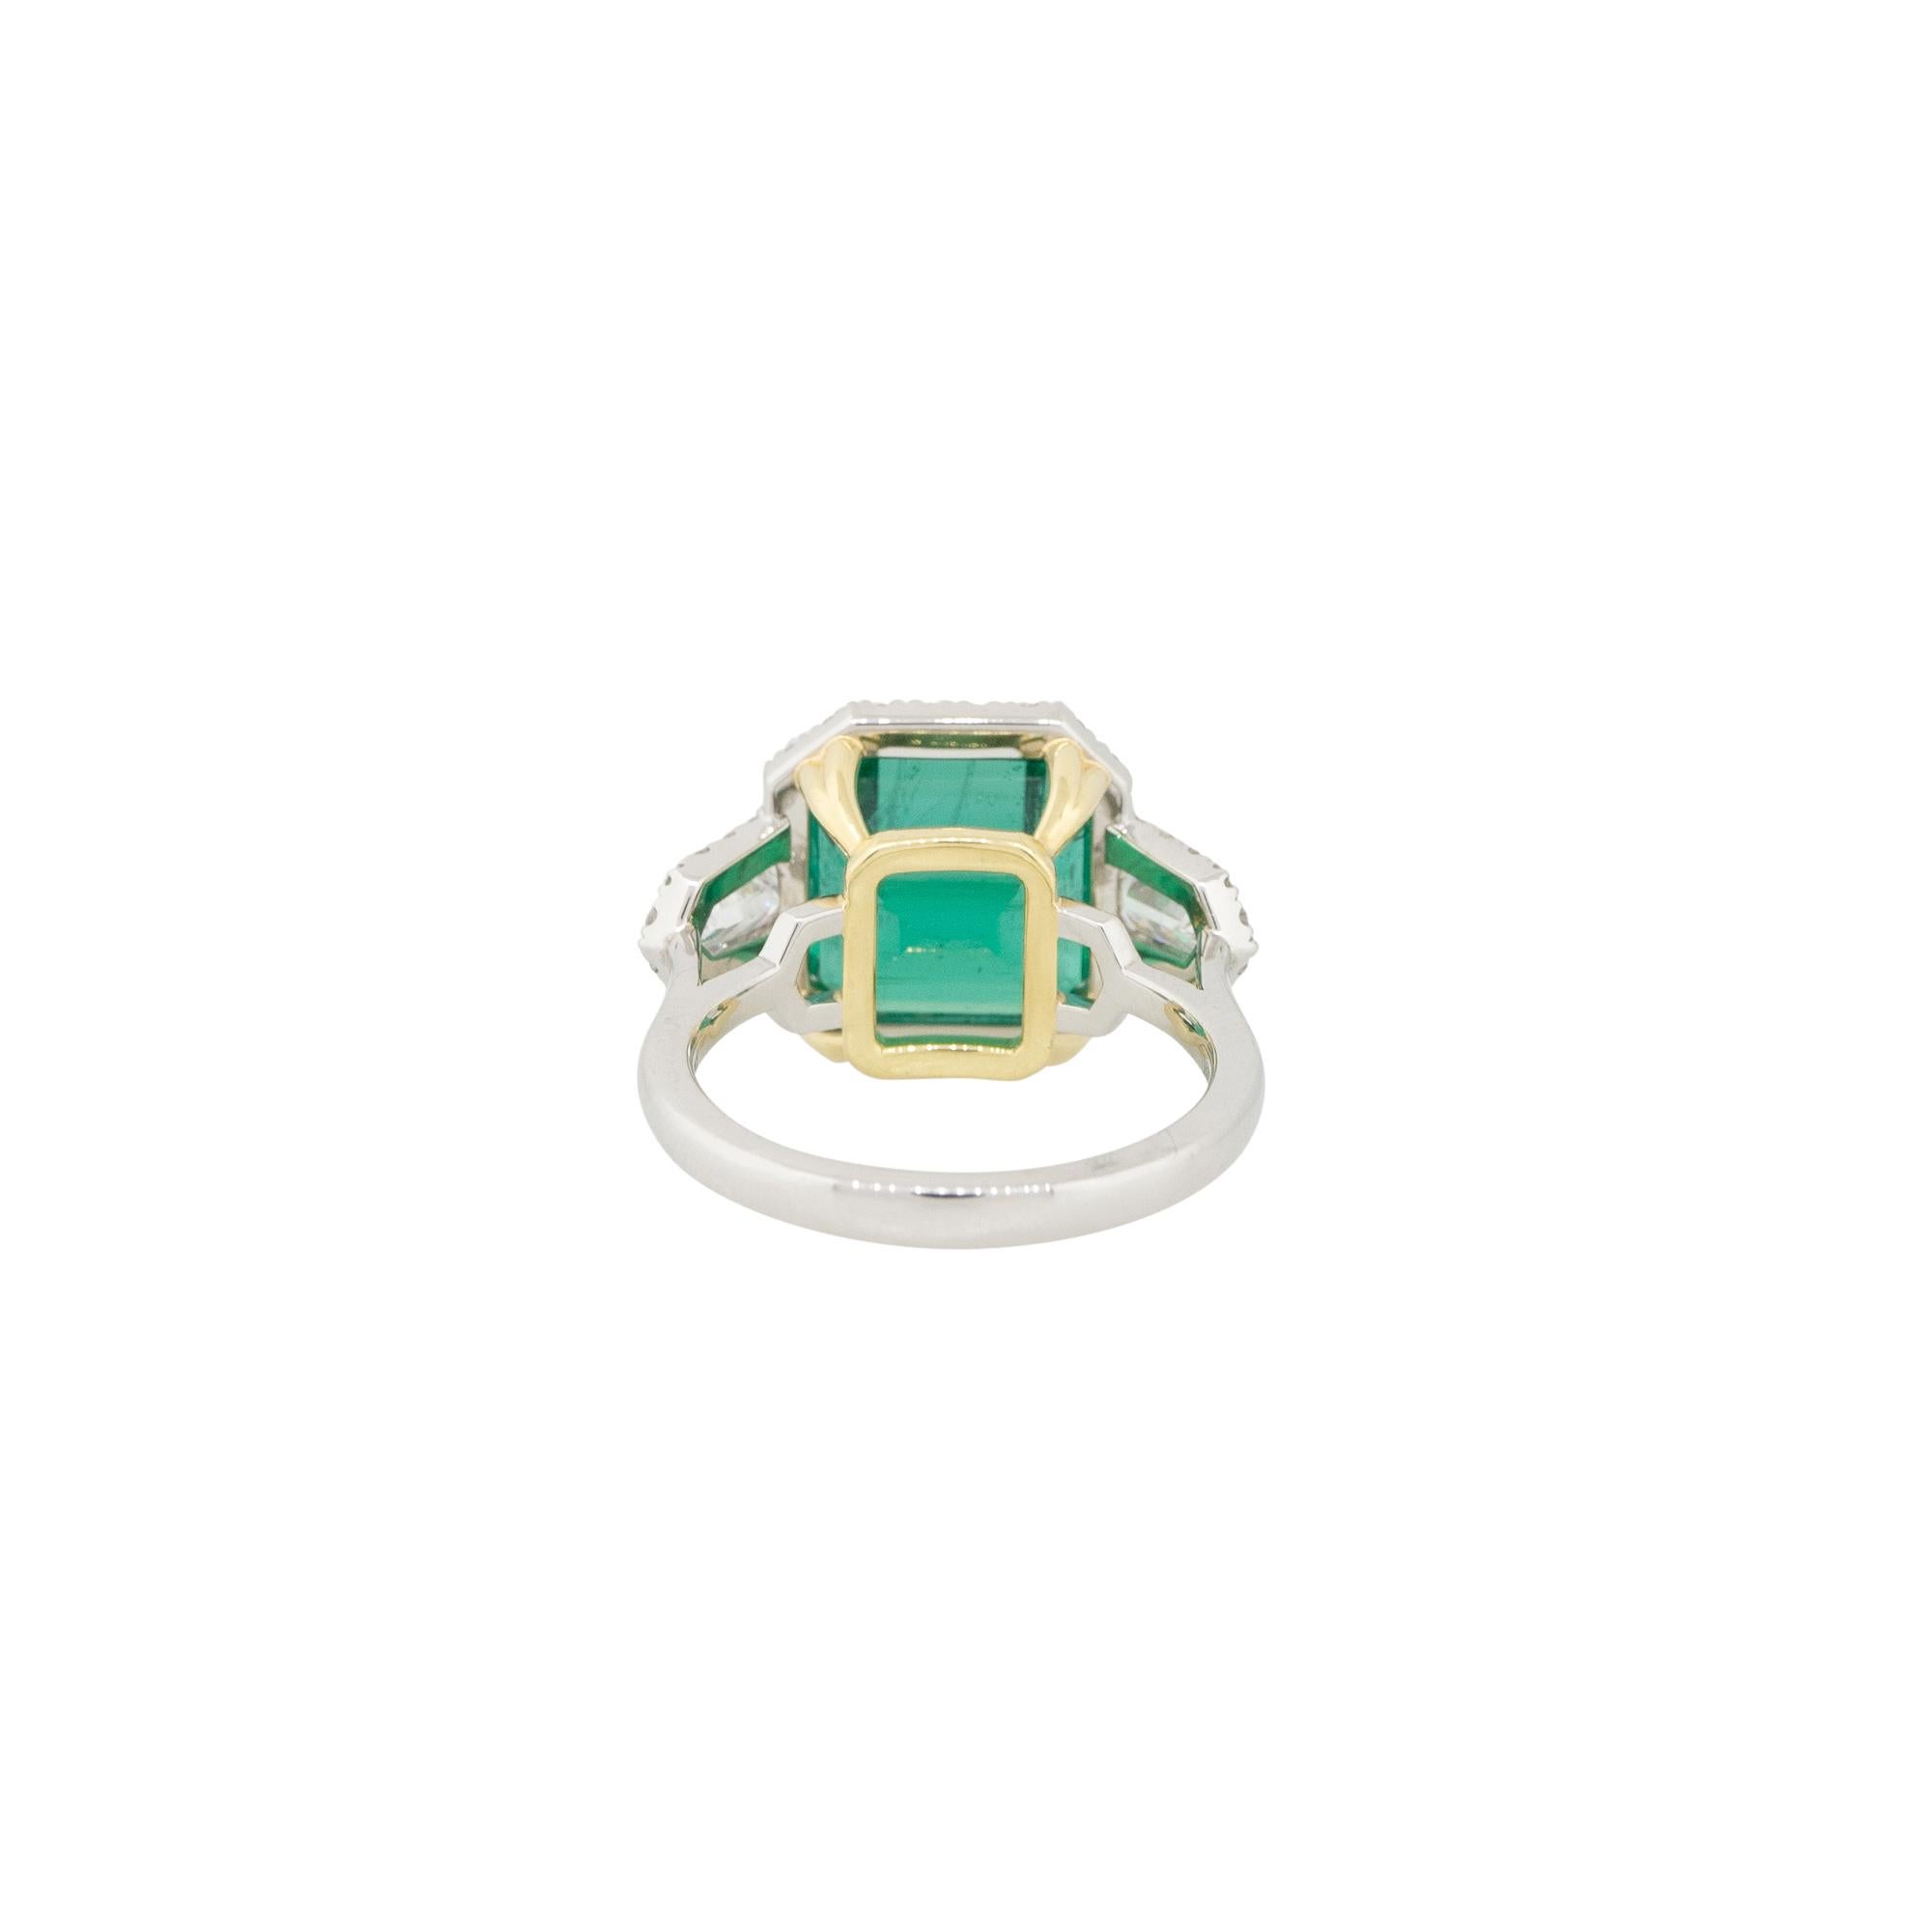 Women's 6.26 Carat Emerald and Diamond Halo Ring Platinum and 18 Karat In Stock For Sale